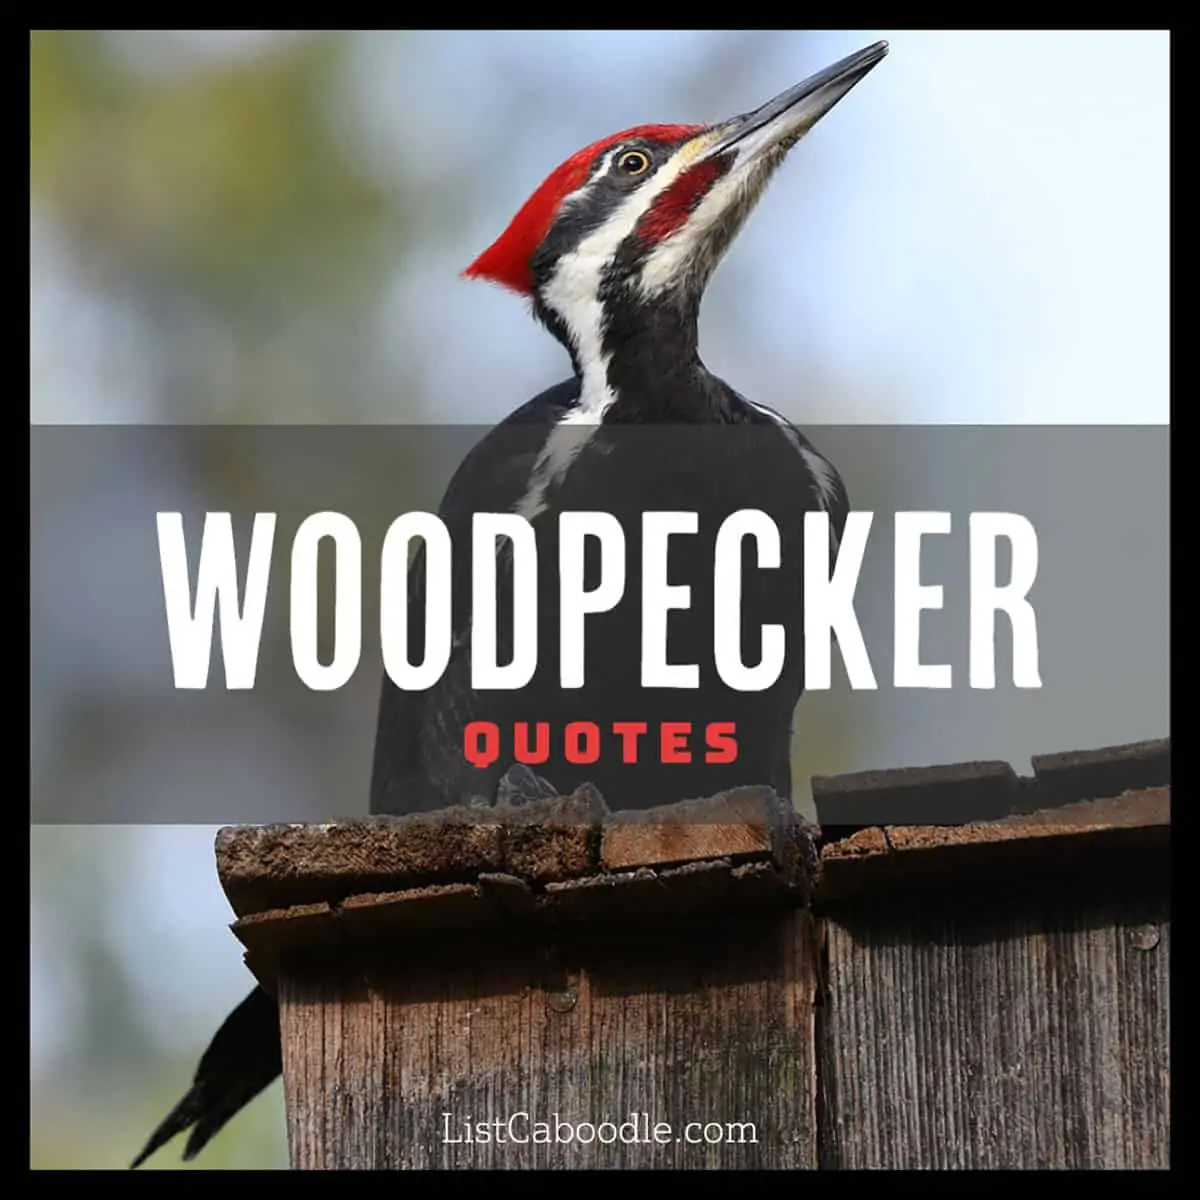 Woodpecker quotes image